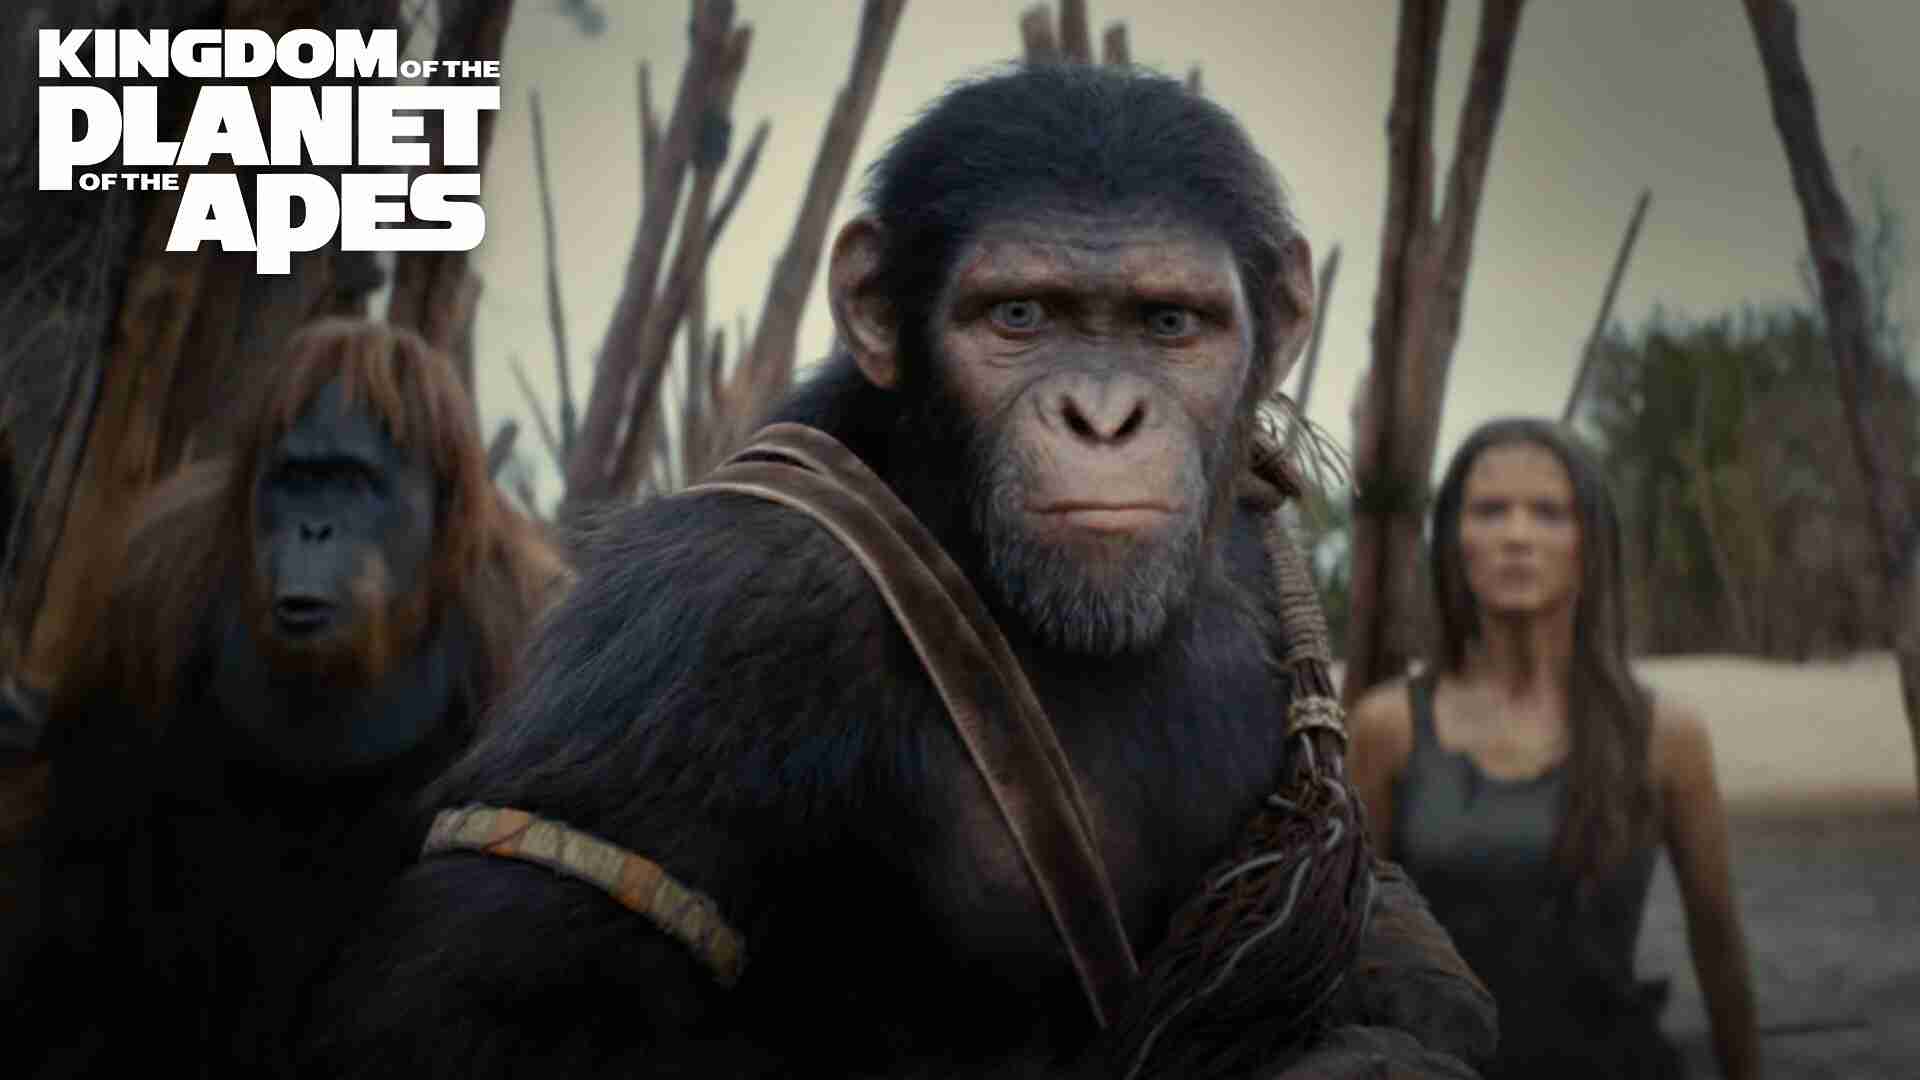 Kingdom of the planet of the Apes Full Movie Download